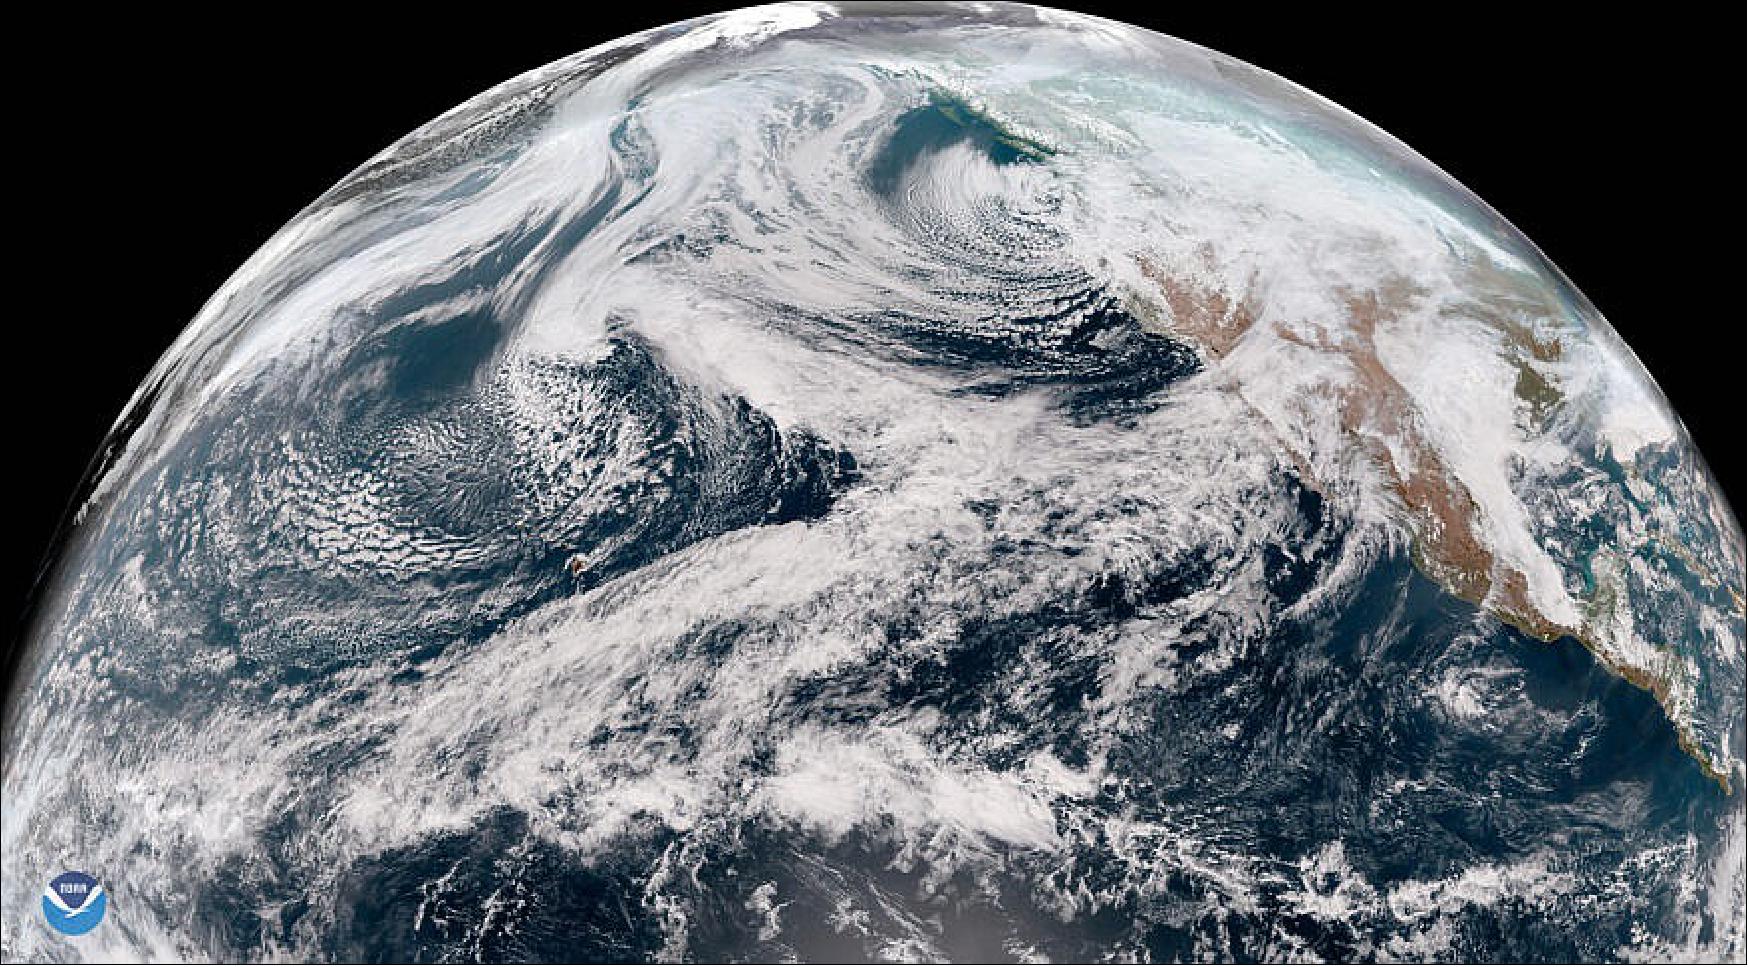 Figure 35: View of the northern hemisphere from the GOES-17 geostationary satellite operated by the National Oceanic and Atmospheric Administration (image credit: NOAA)